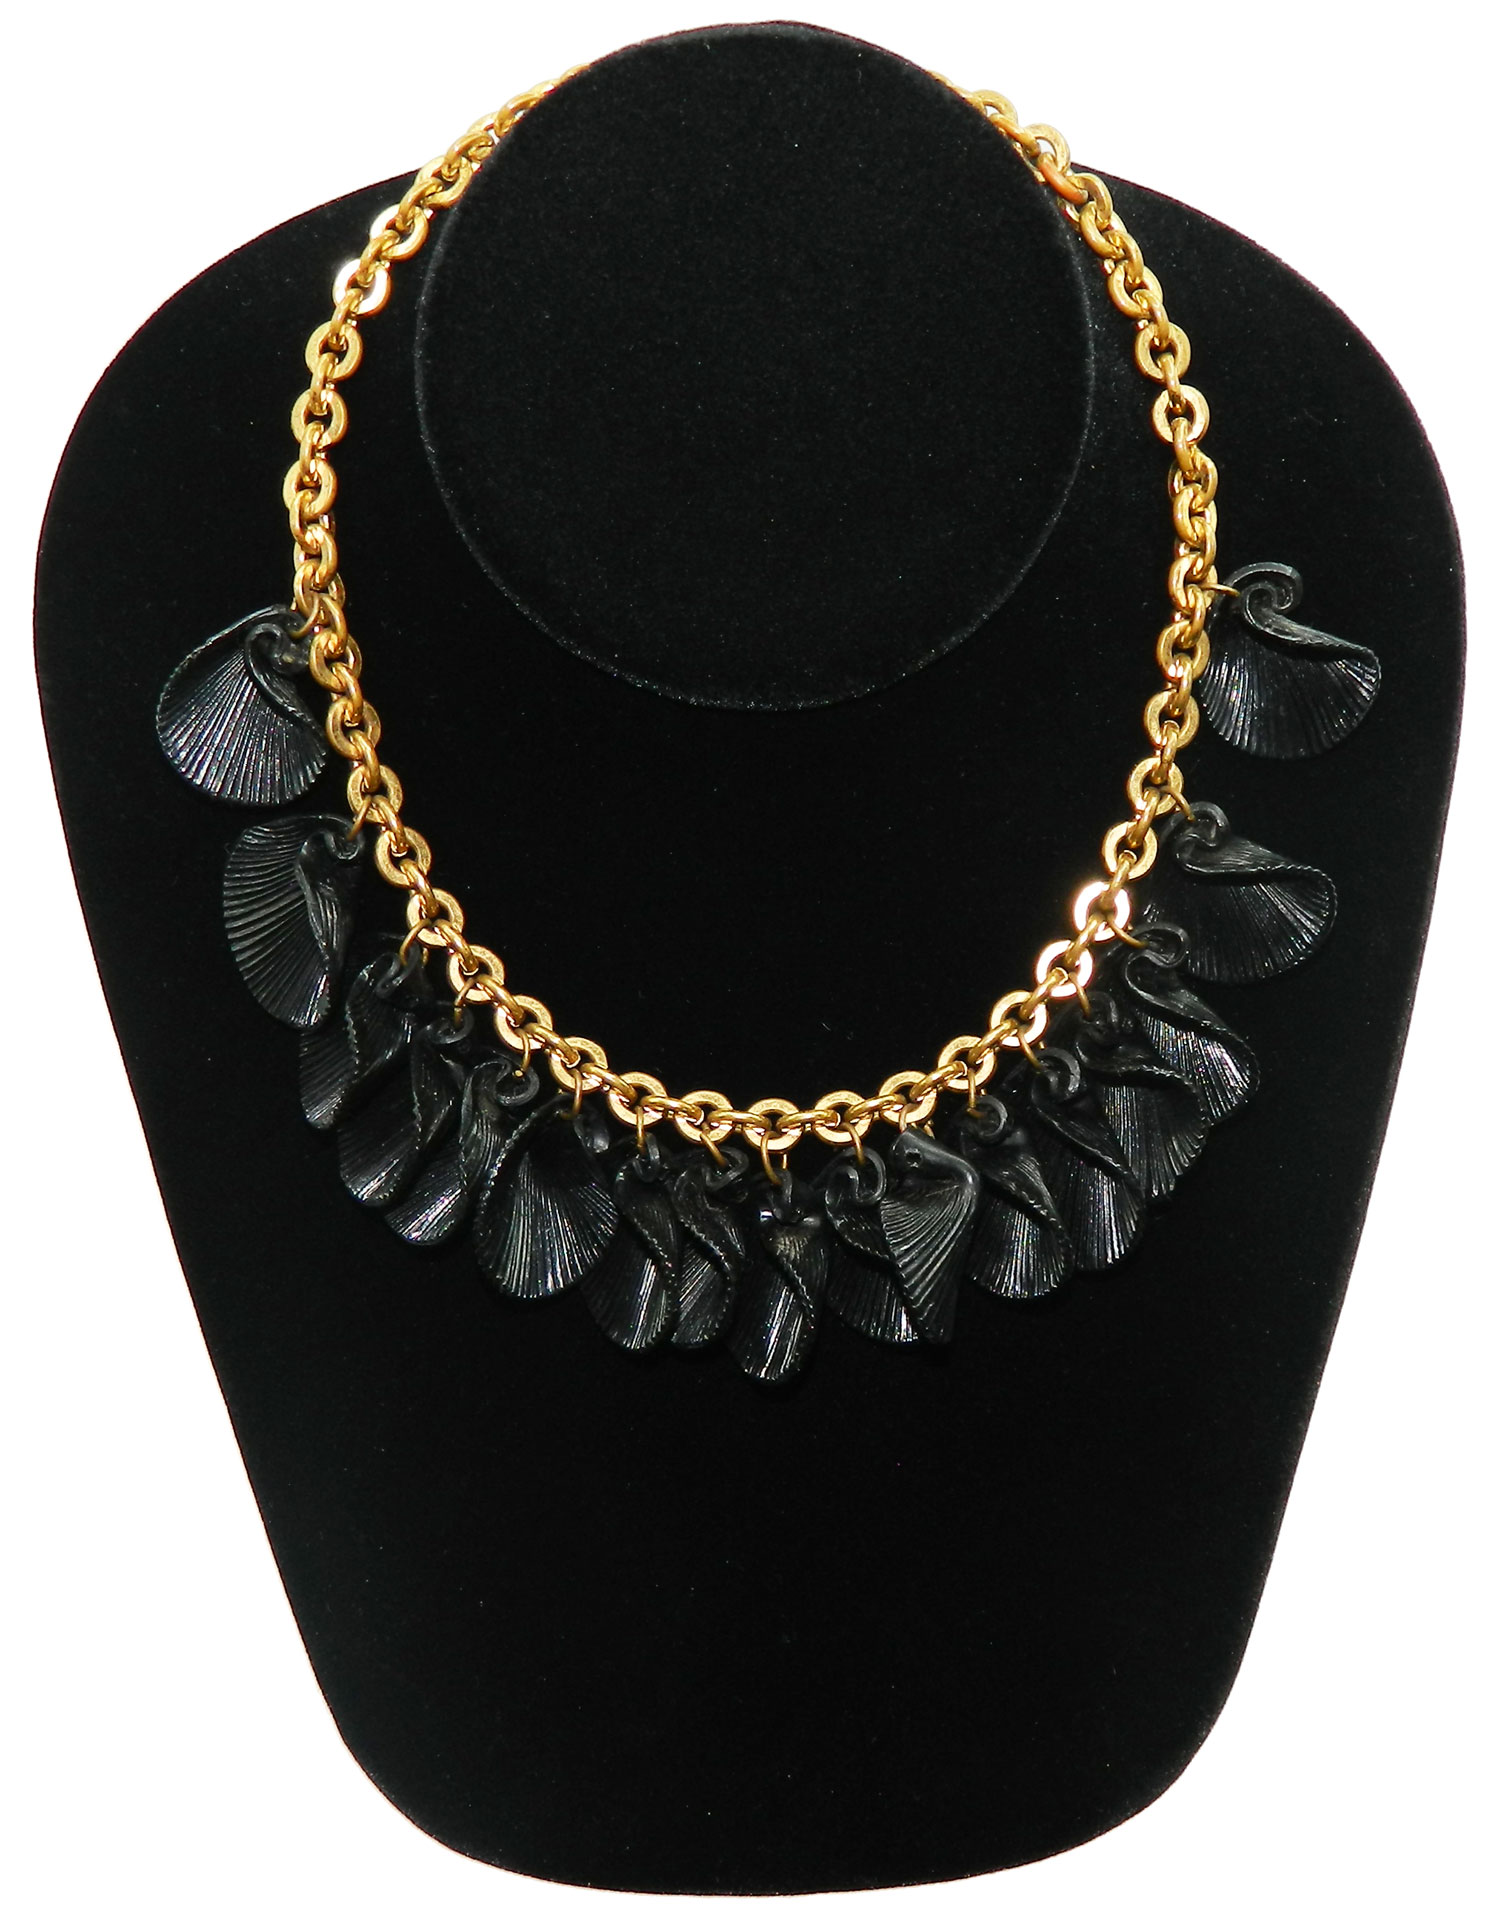 1930s black shell celluloid necklace